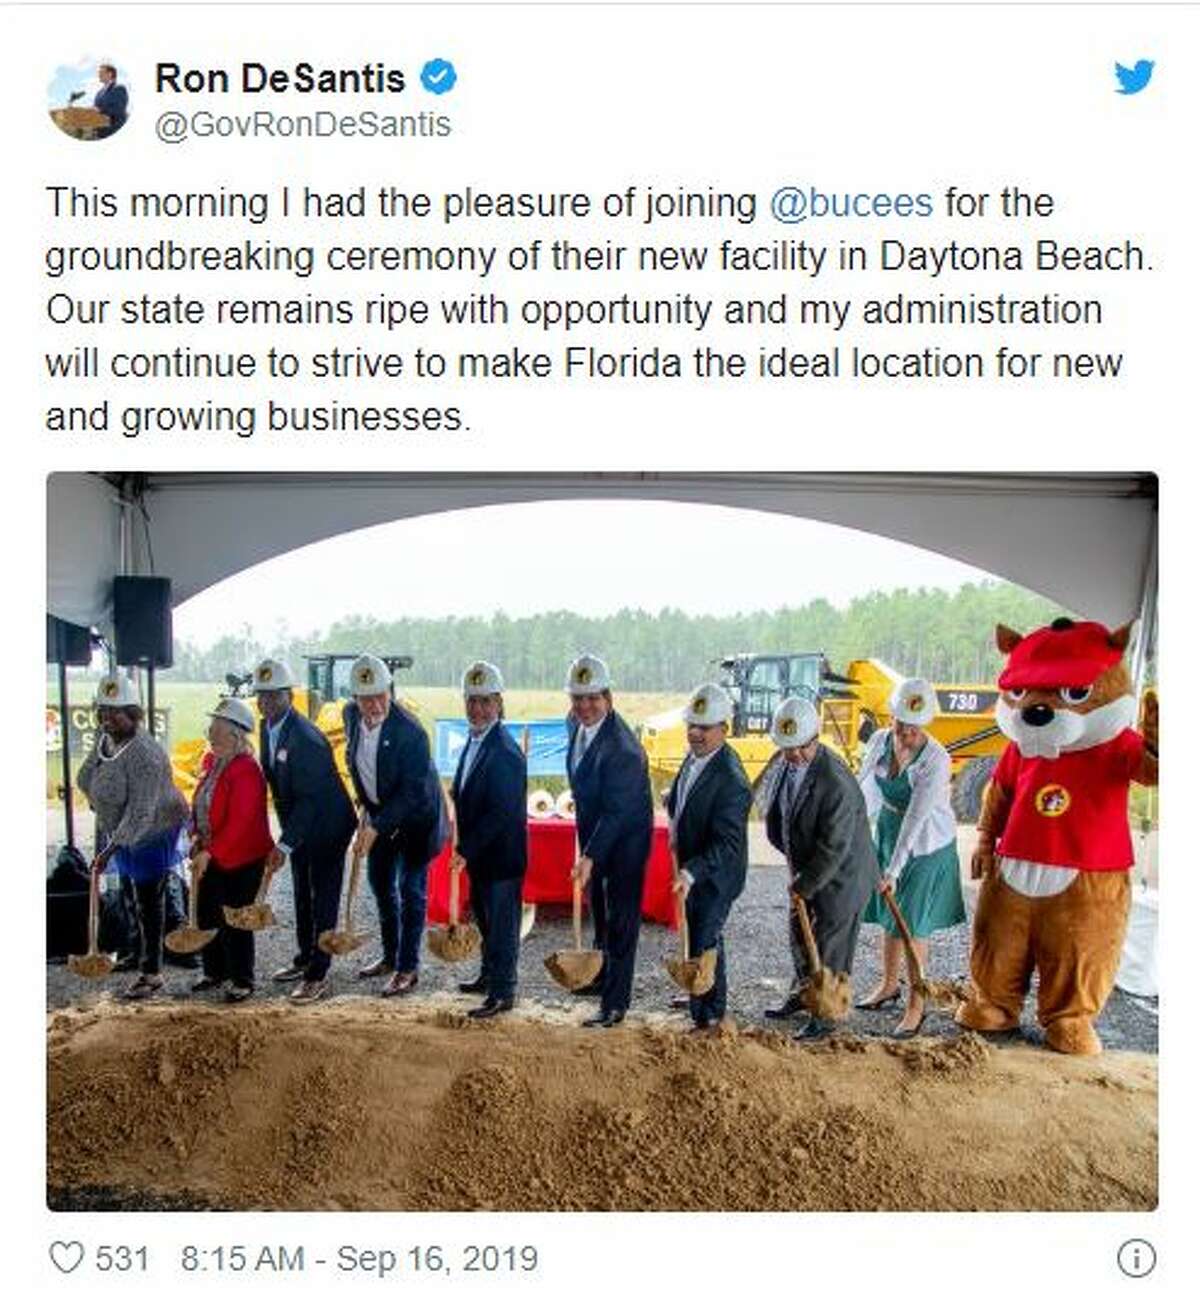 Buc-ee's broke ground for first Florida store in Daytona Beach on Sept. 16, 2019